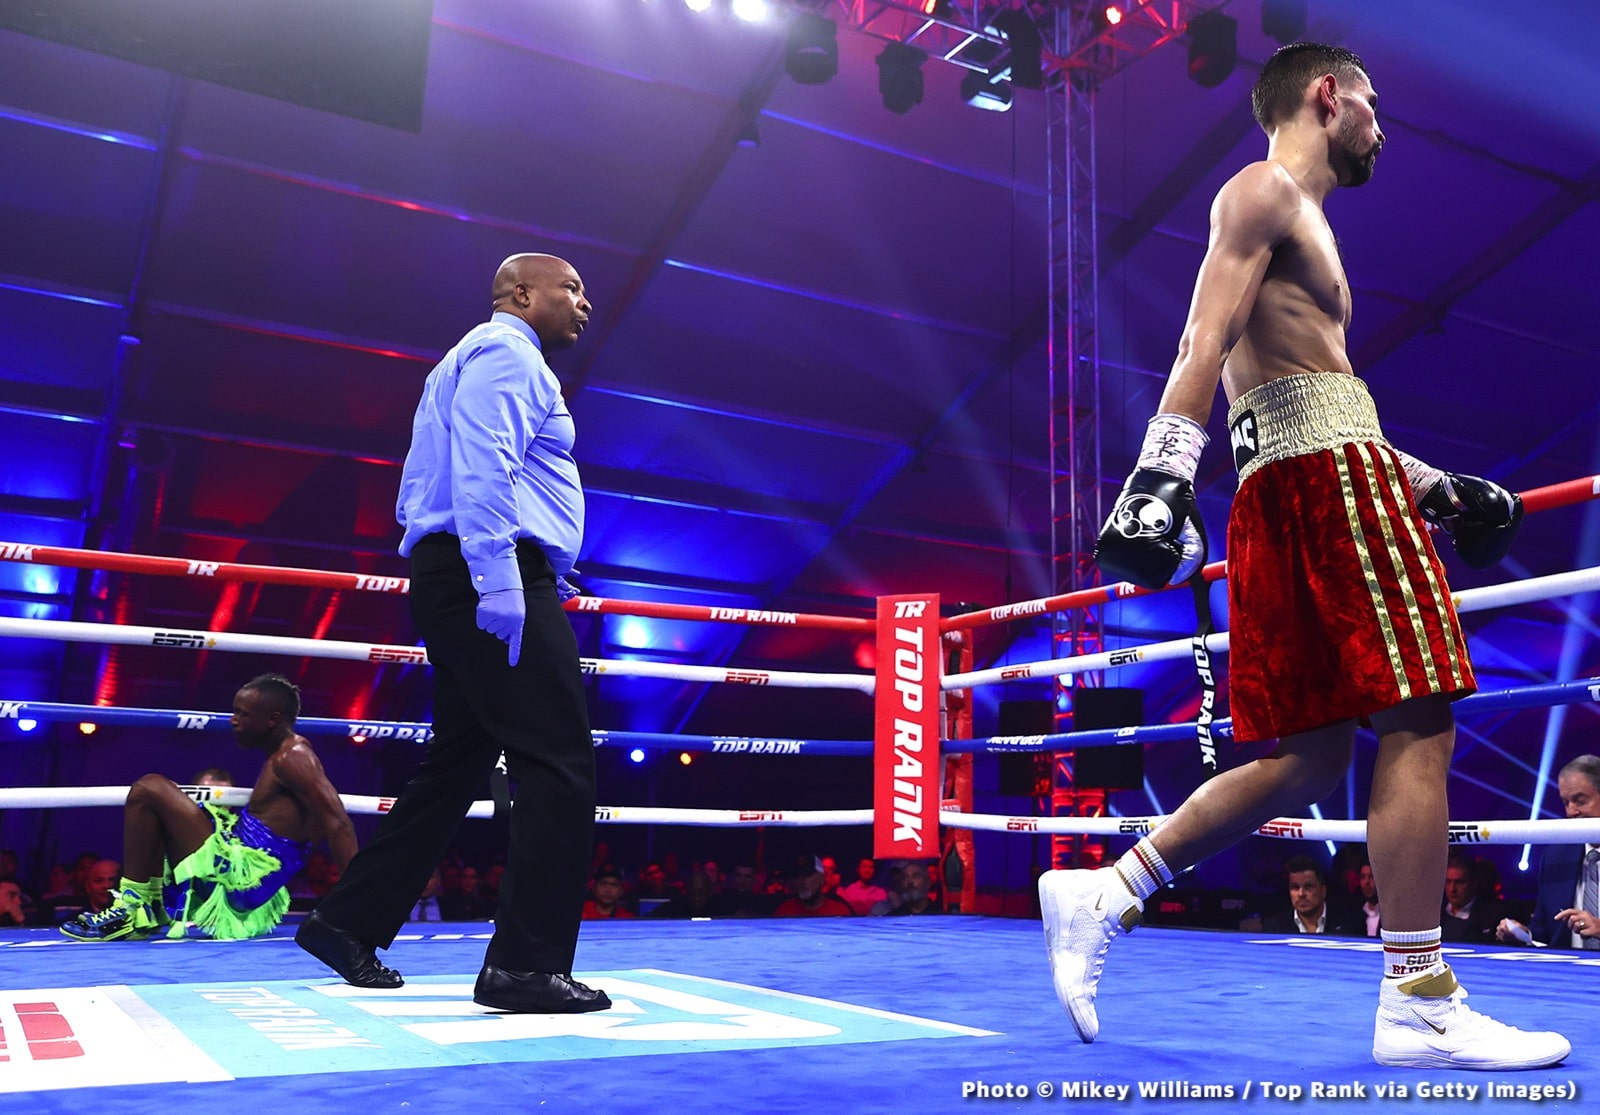 Image: Results / Photos: Alimkhanuly destroys Dignum, Ortiz defeats Herring